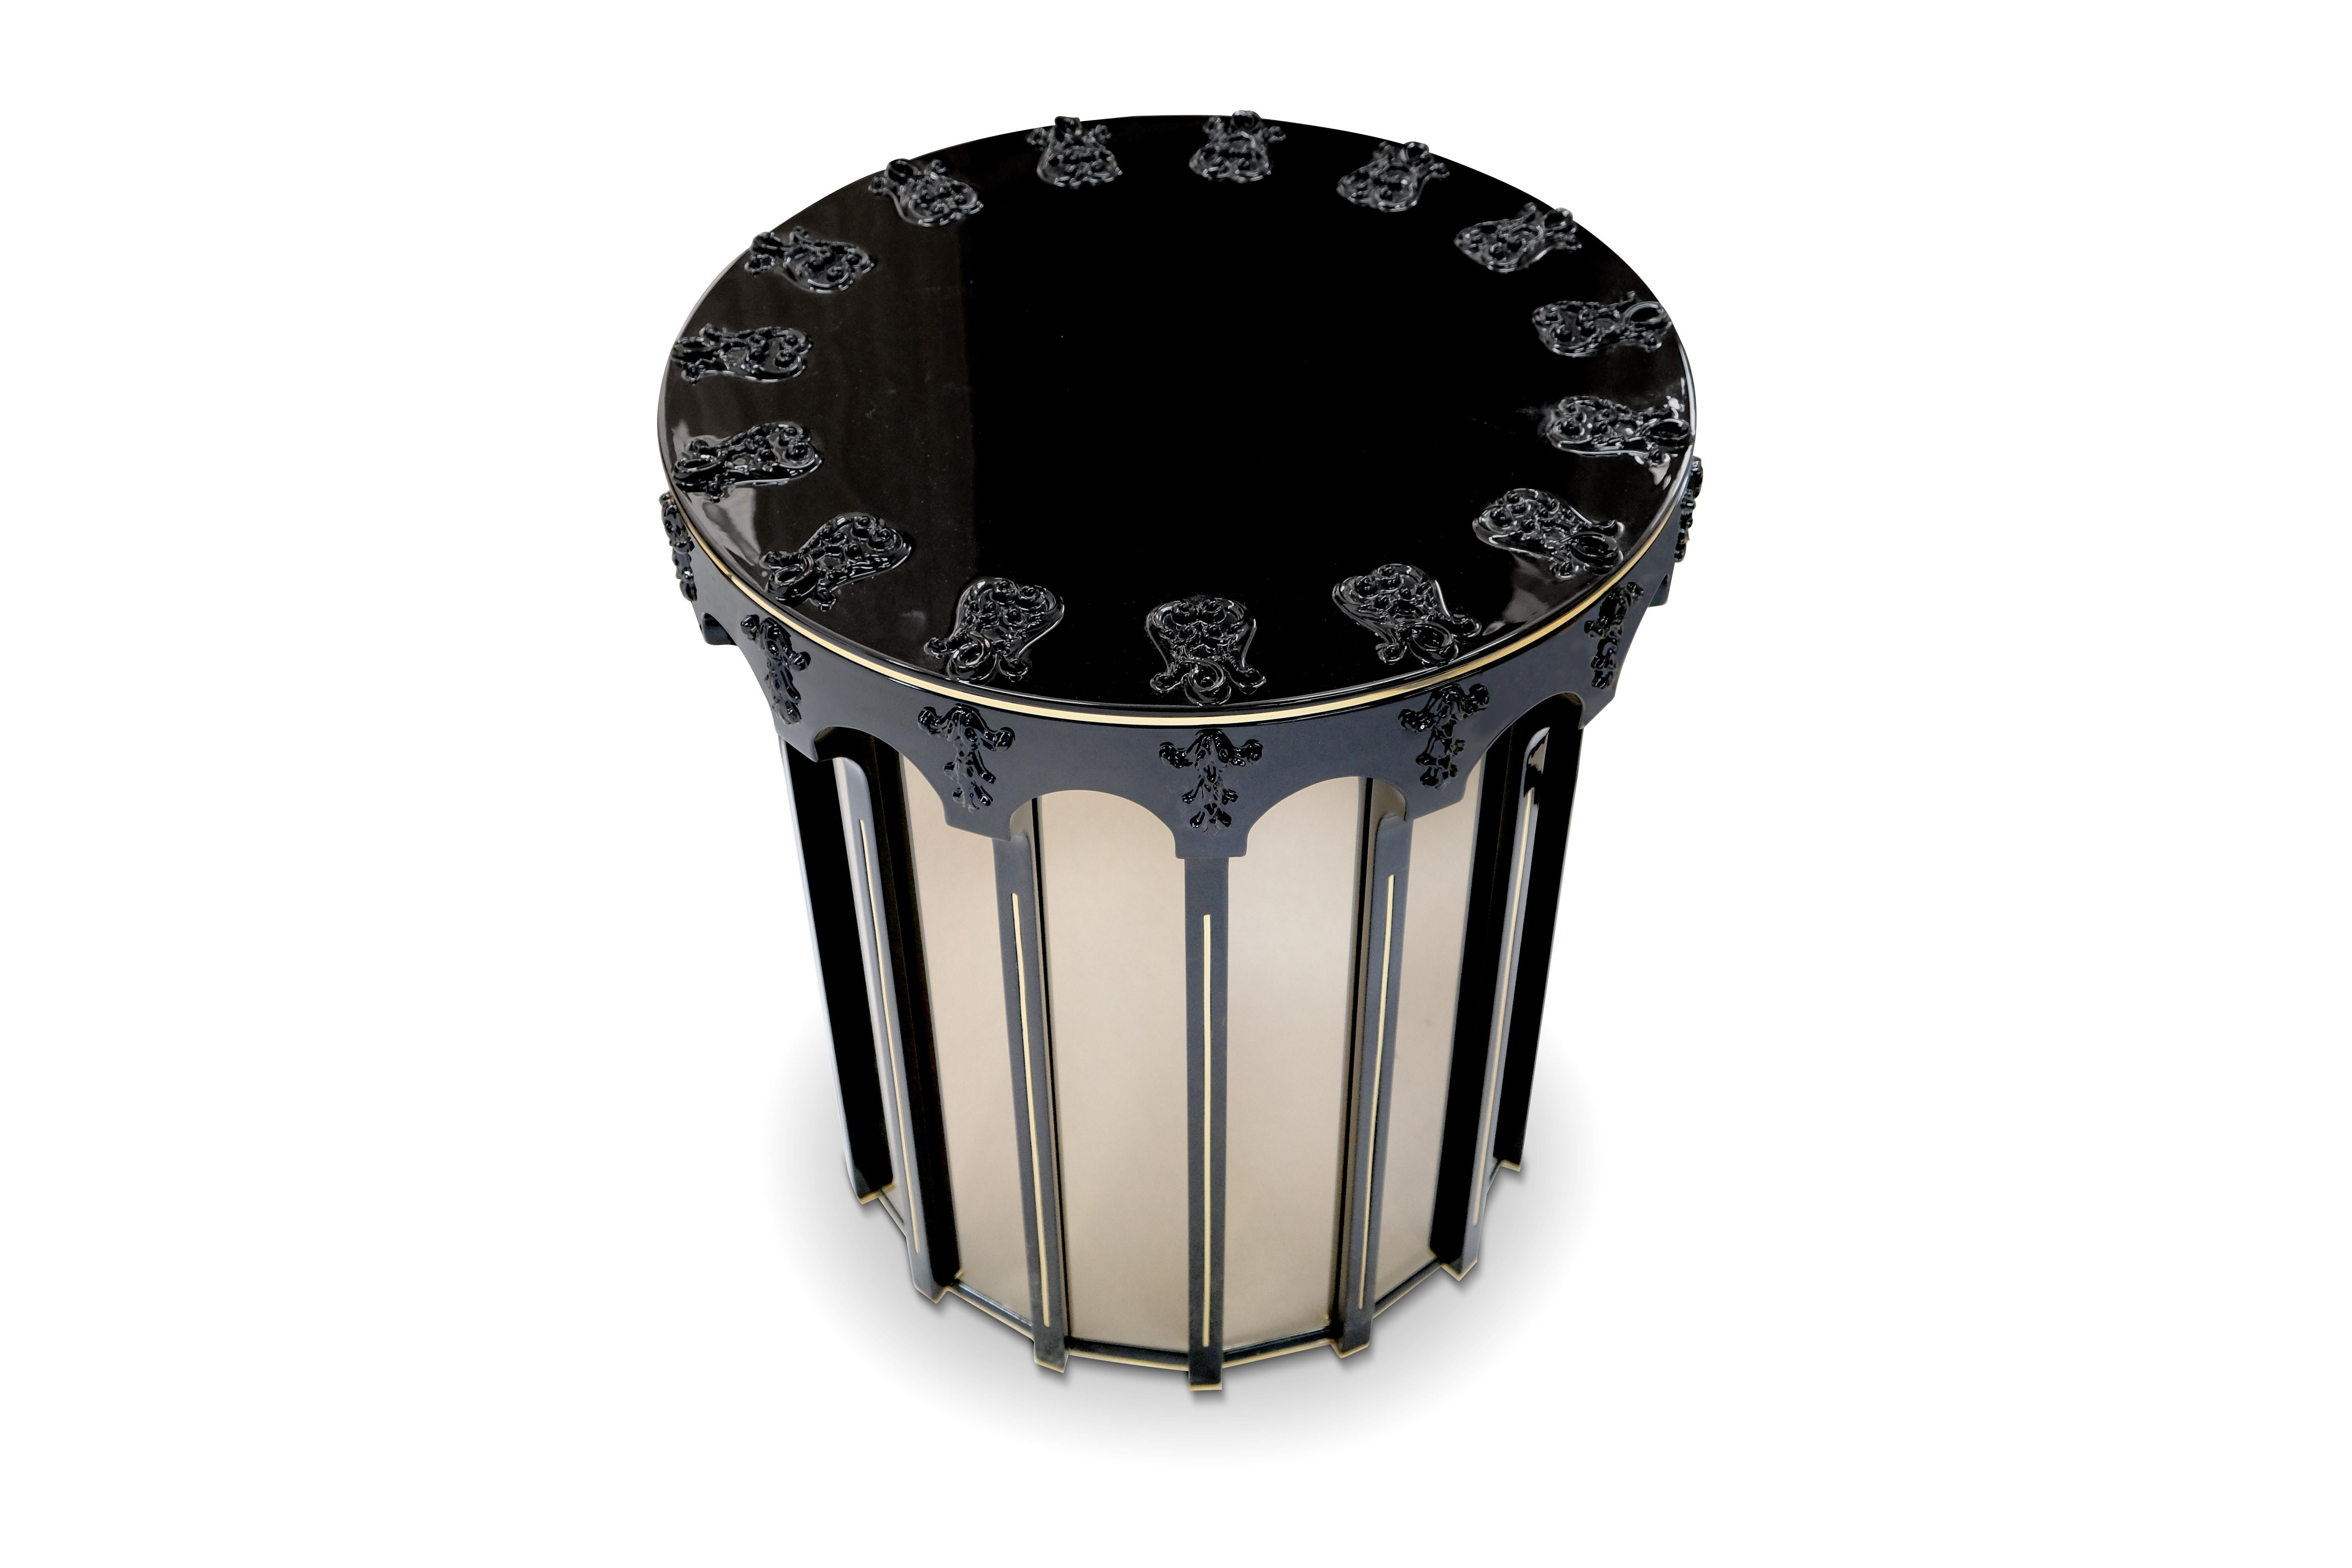 Elise side table represents a memorial recognition to one of the most important expressions of the romanticism architecture of the XIX century. With Pena Palace, in Portugal, in mind and inspired by its windows and towers, as well as by its